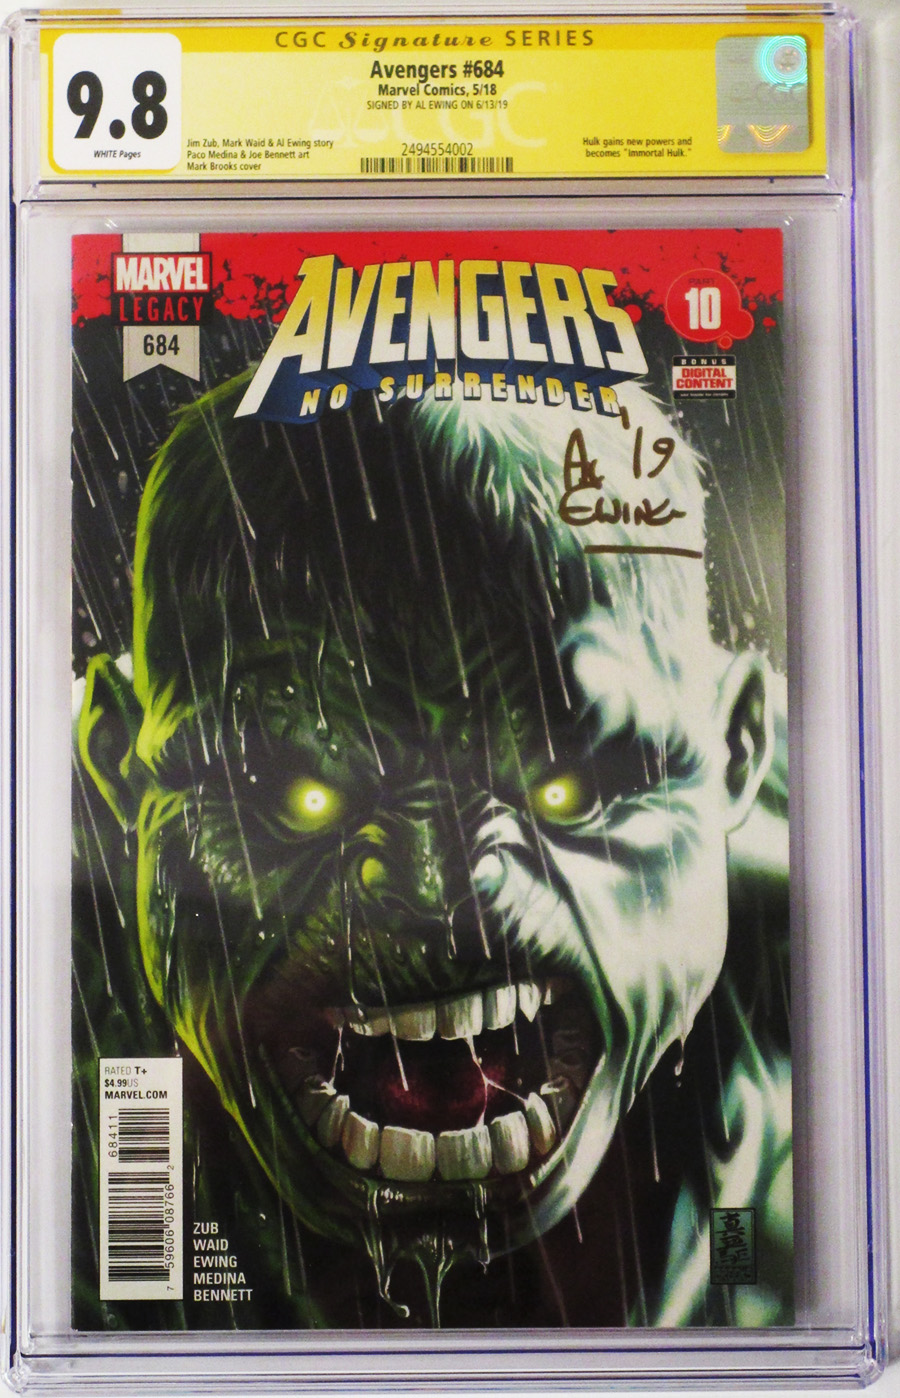 Avengers Vol 6 #684 Cover F CGC Signature Series 9.8 Signed by Al Ewing Regular Mark Brooks Cover (No Surrender Part 10)(Marvel Legacy Tie-In)